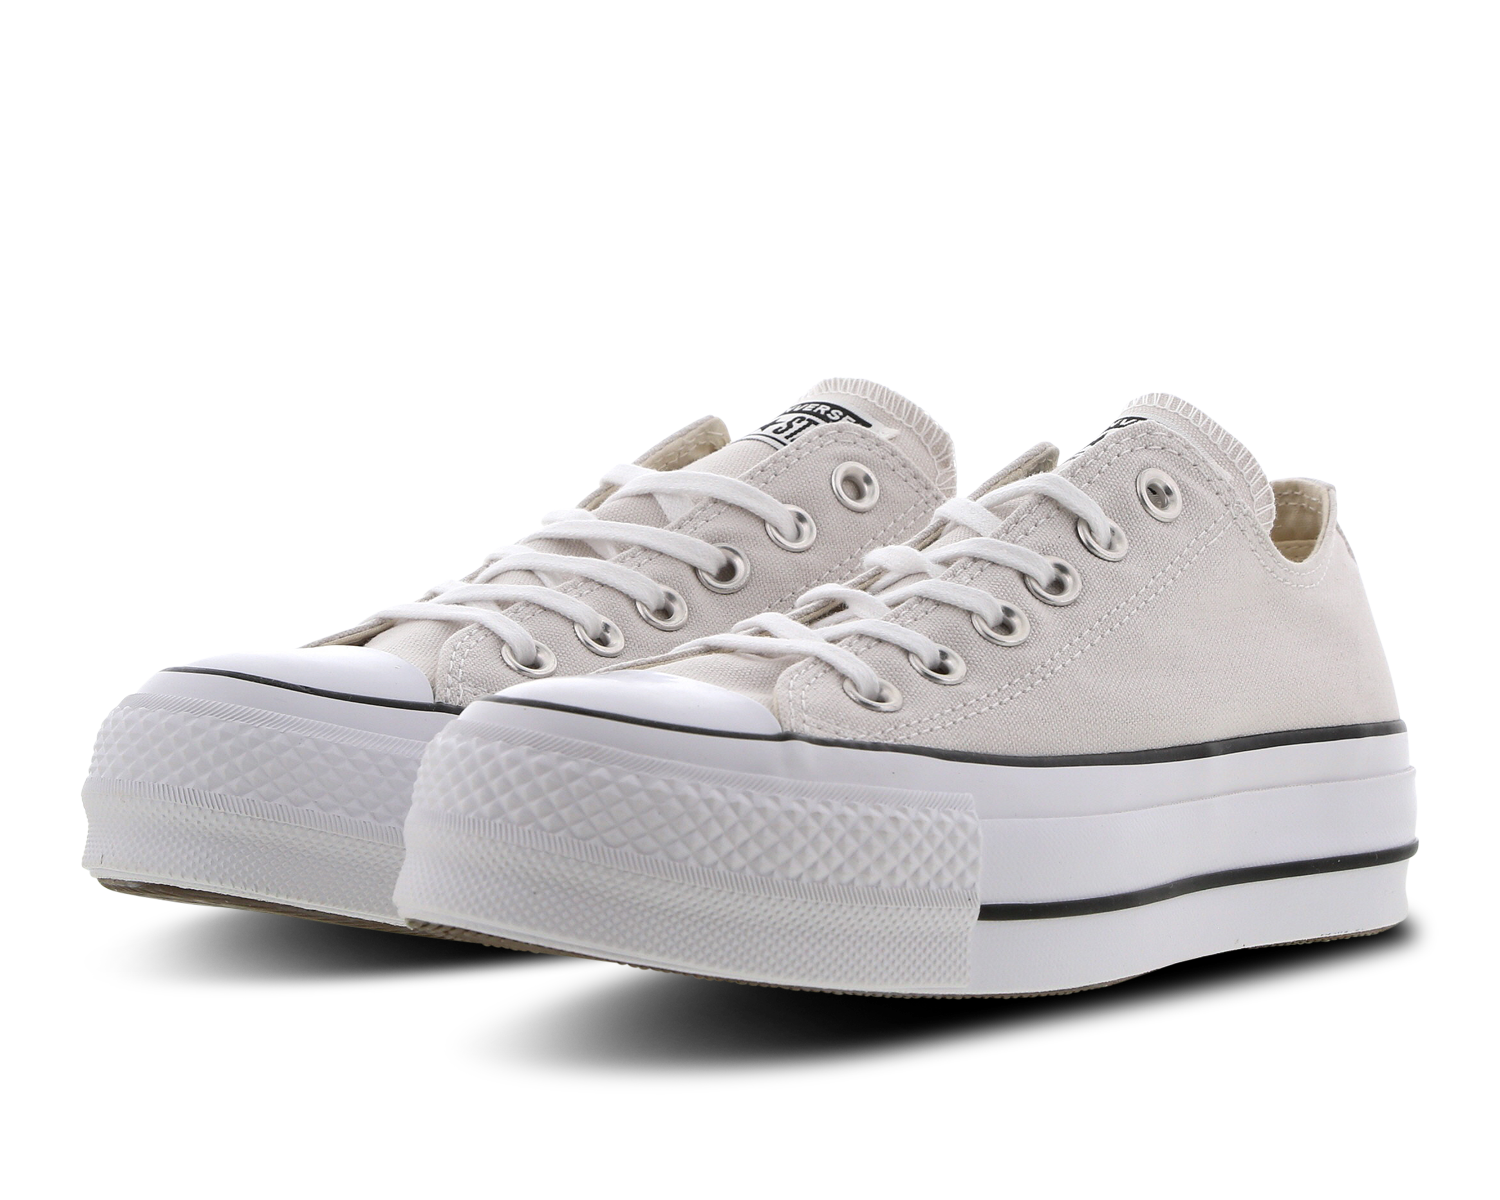 converse all star ox low platform white canvas